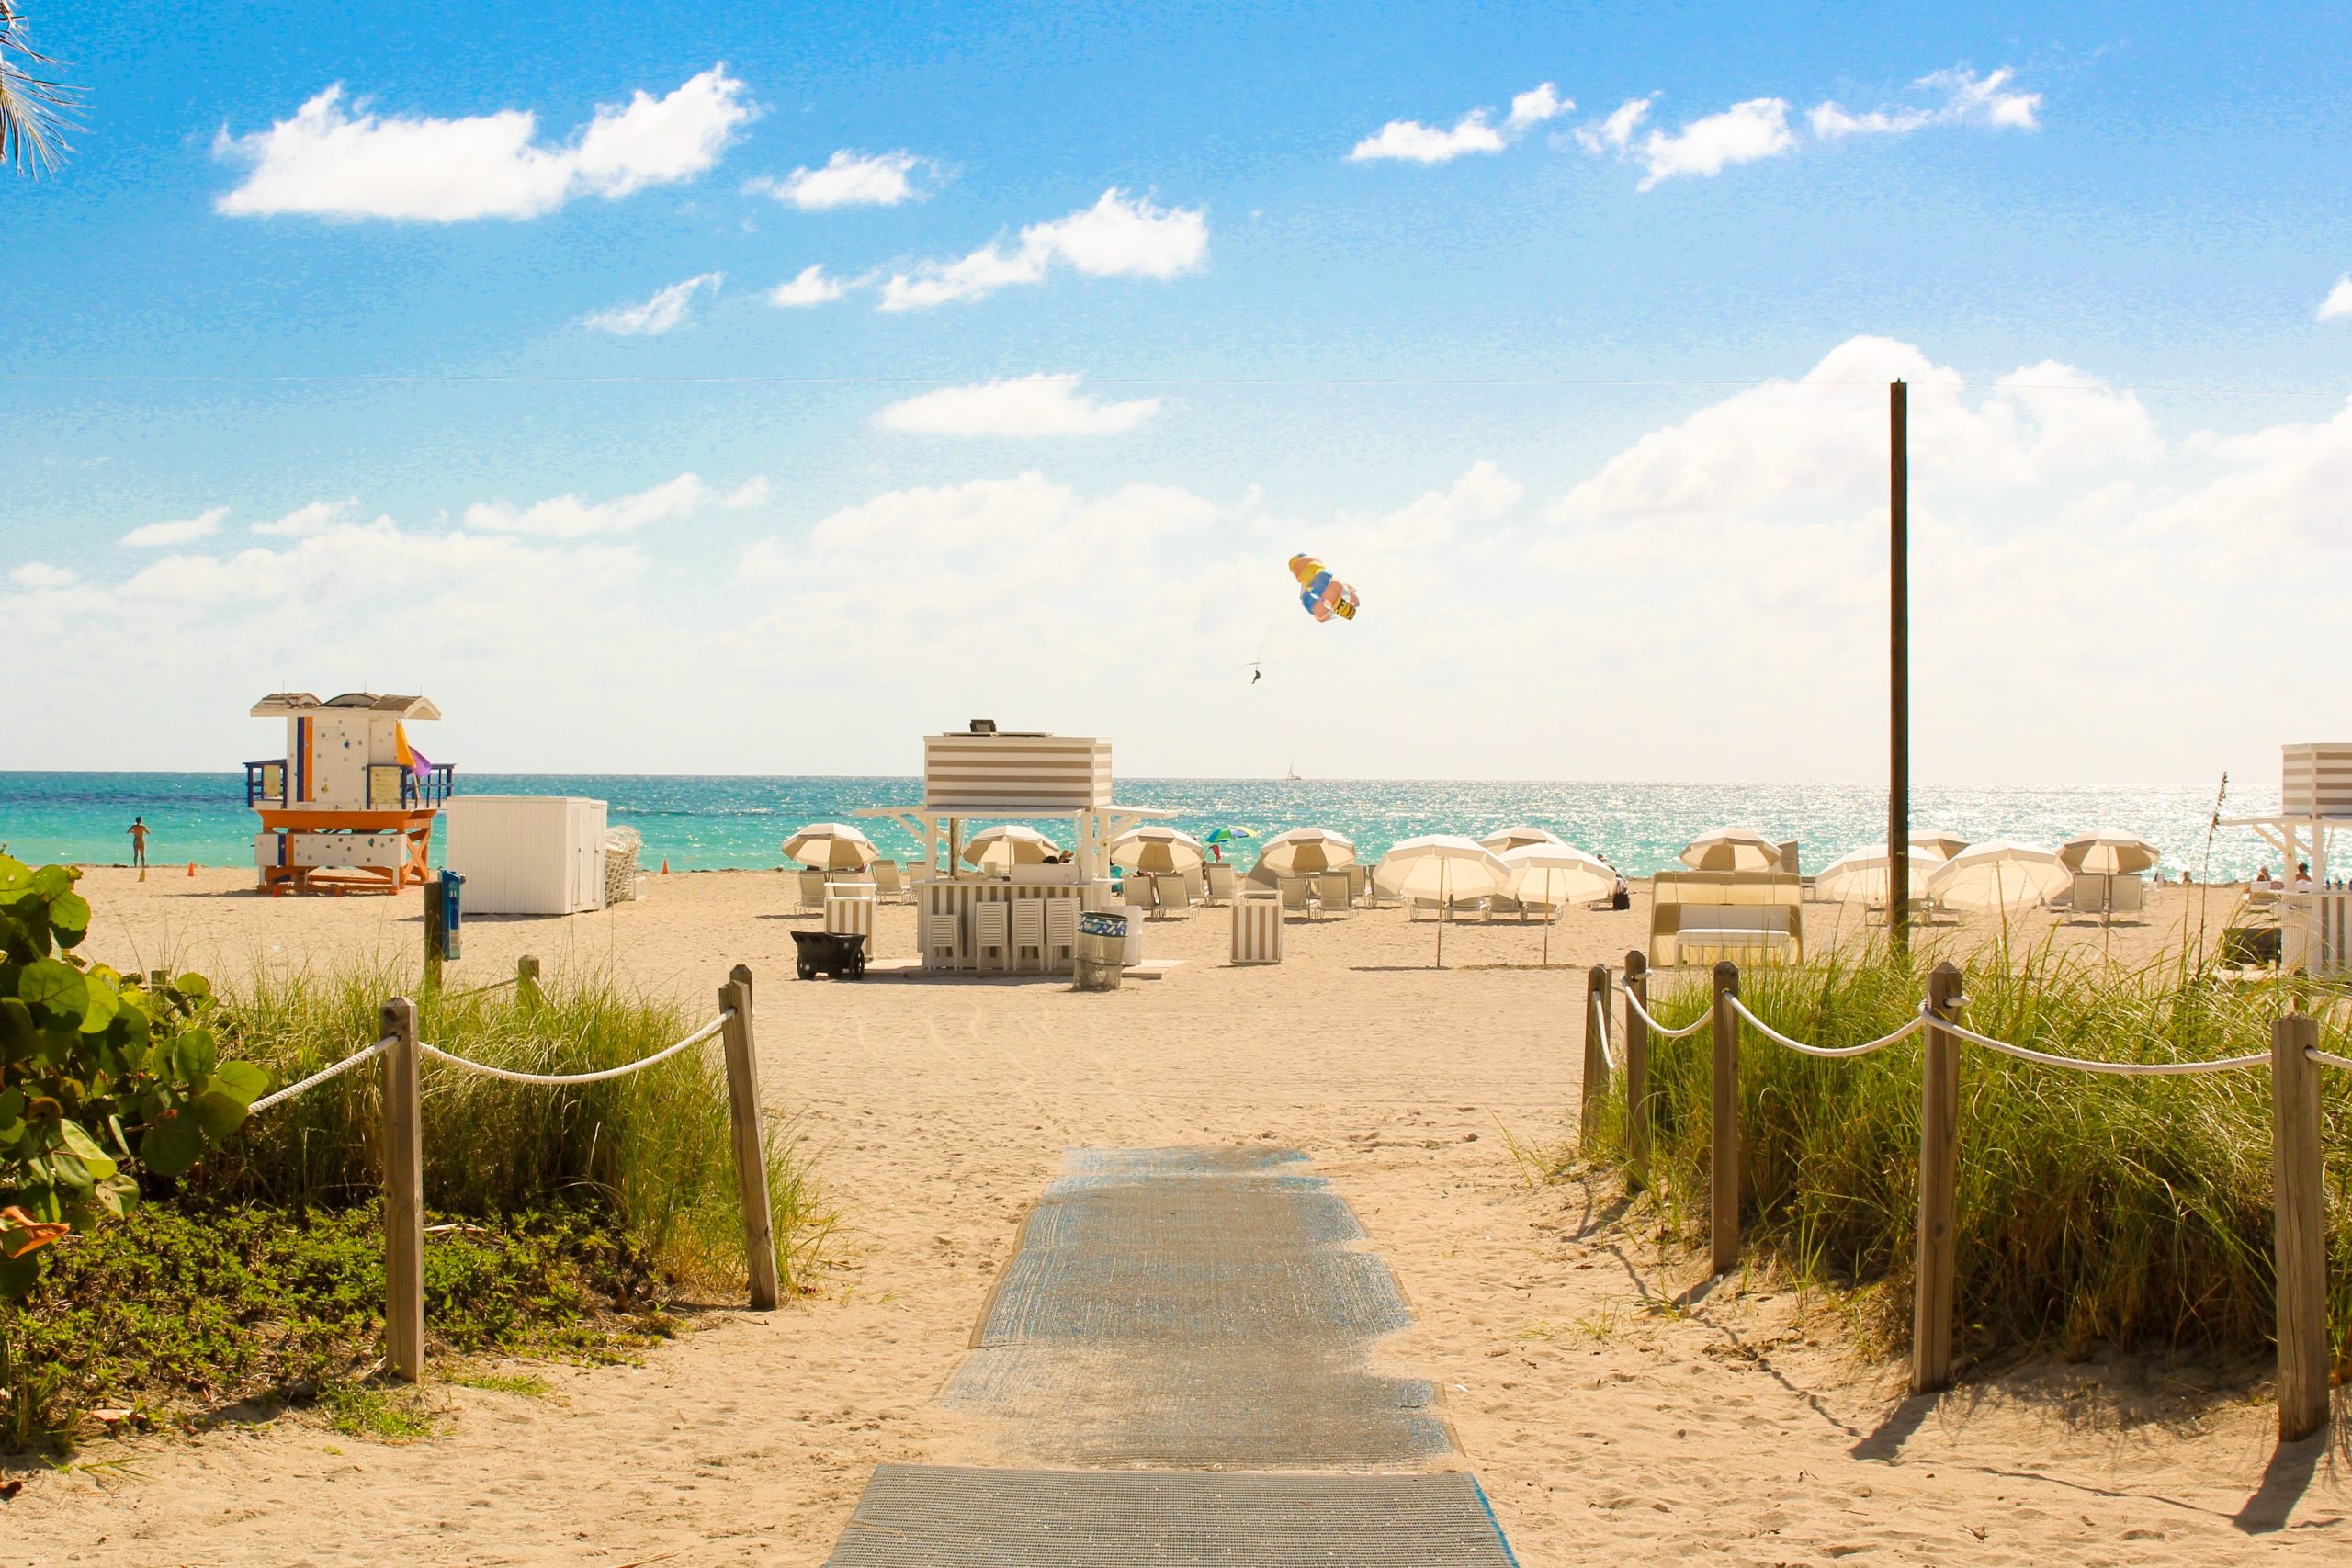 Sandy beach walkway with dunes on the right and left, facing umbrellas towards the ocean.